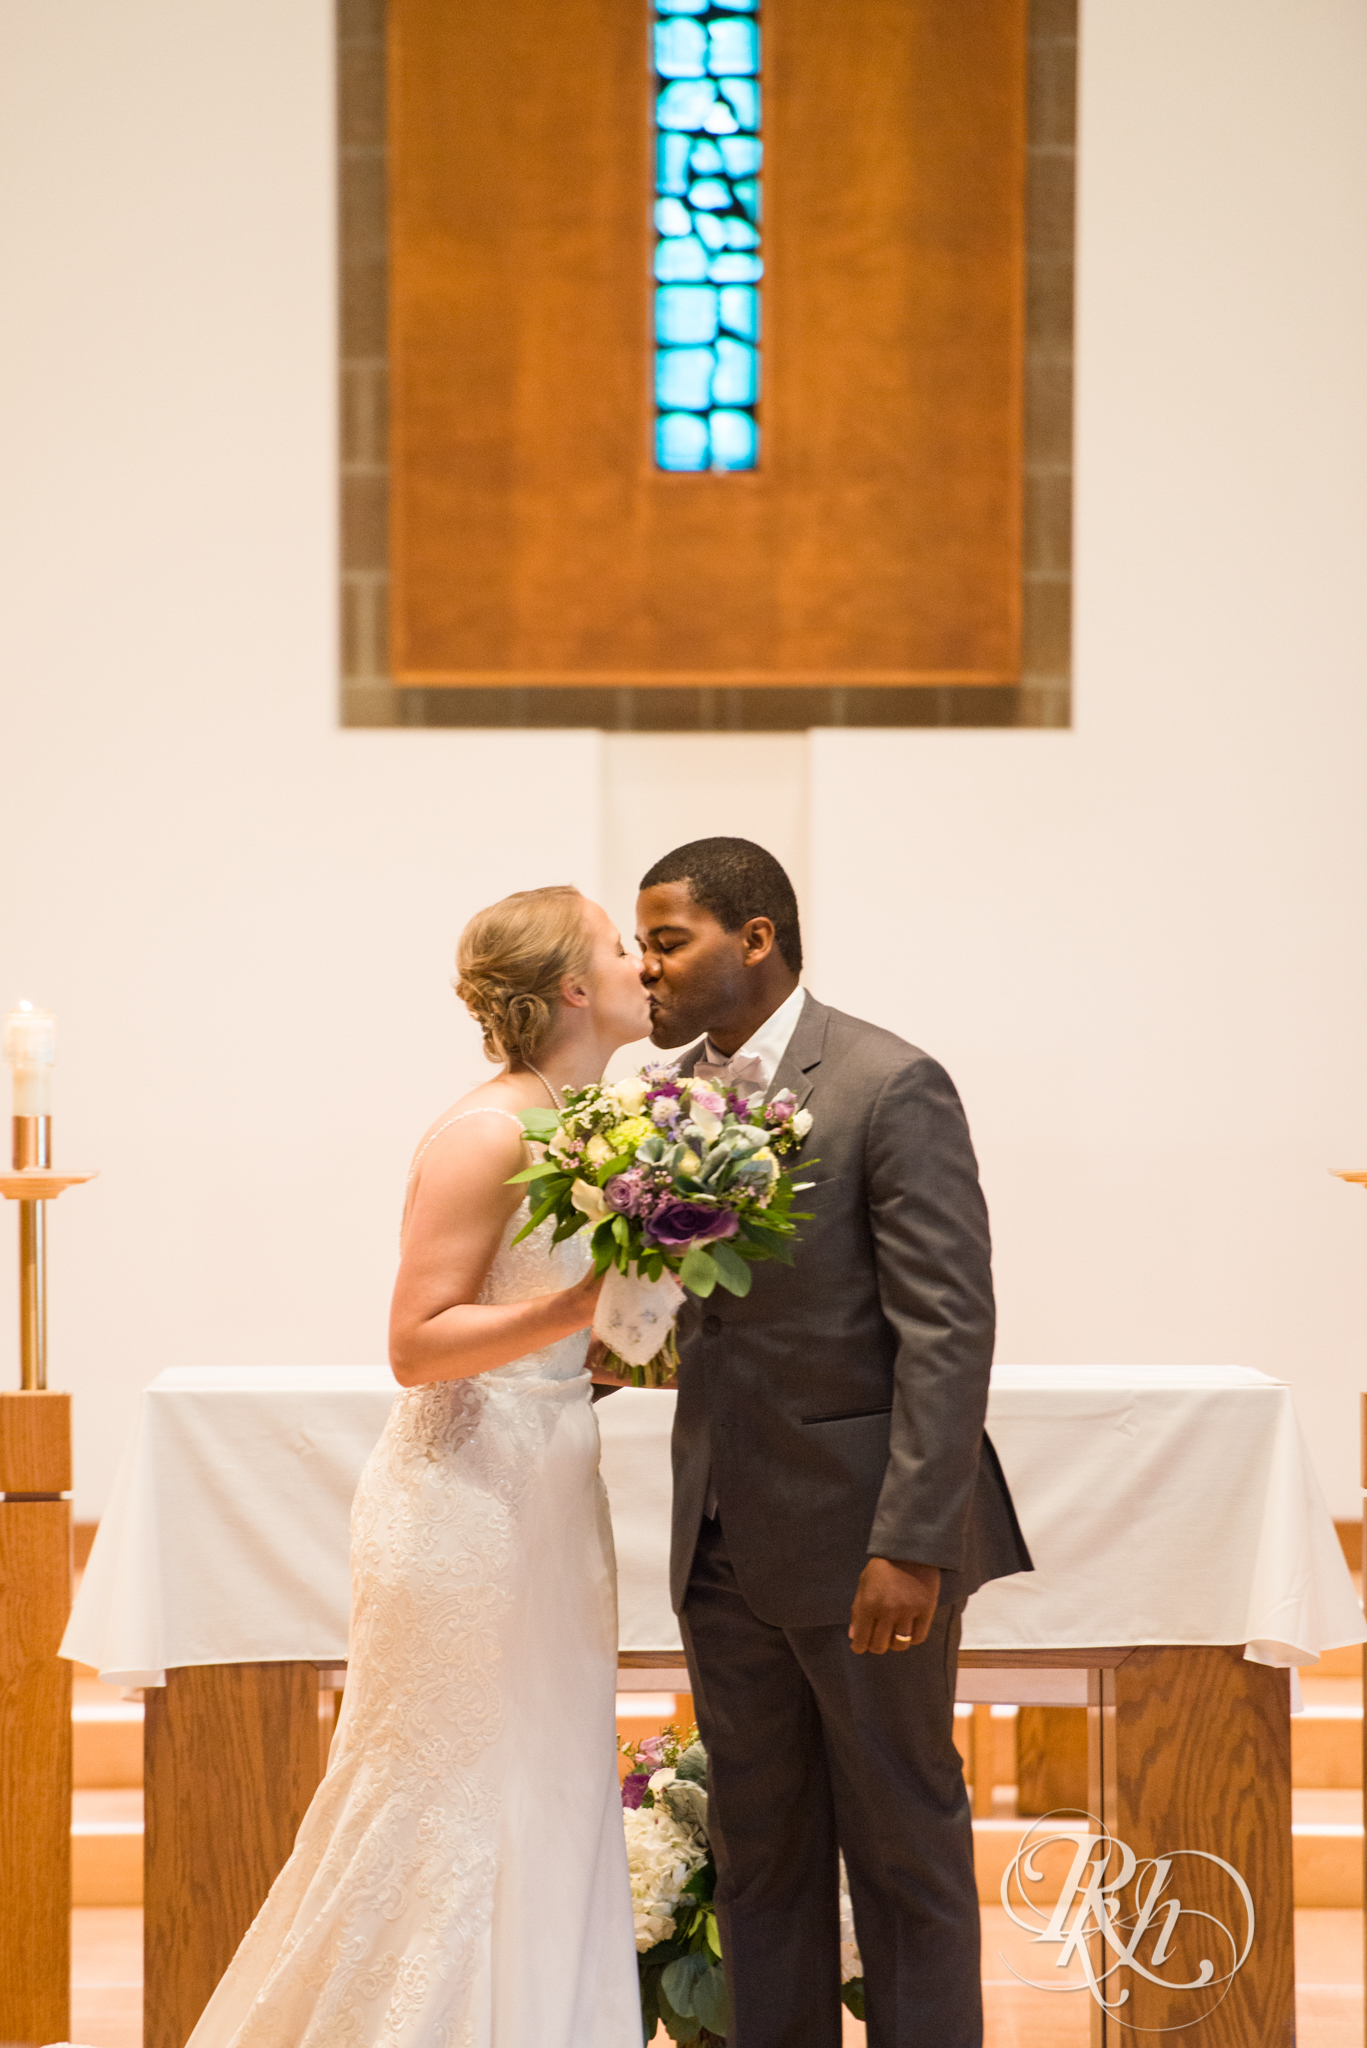 Black groom and white bride kiss during wedding ceremony at church in Richfield, Minnesota.